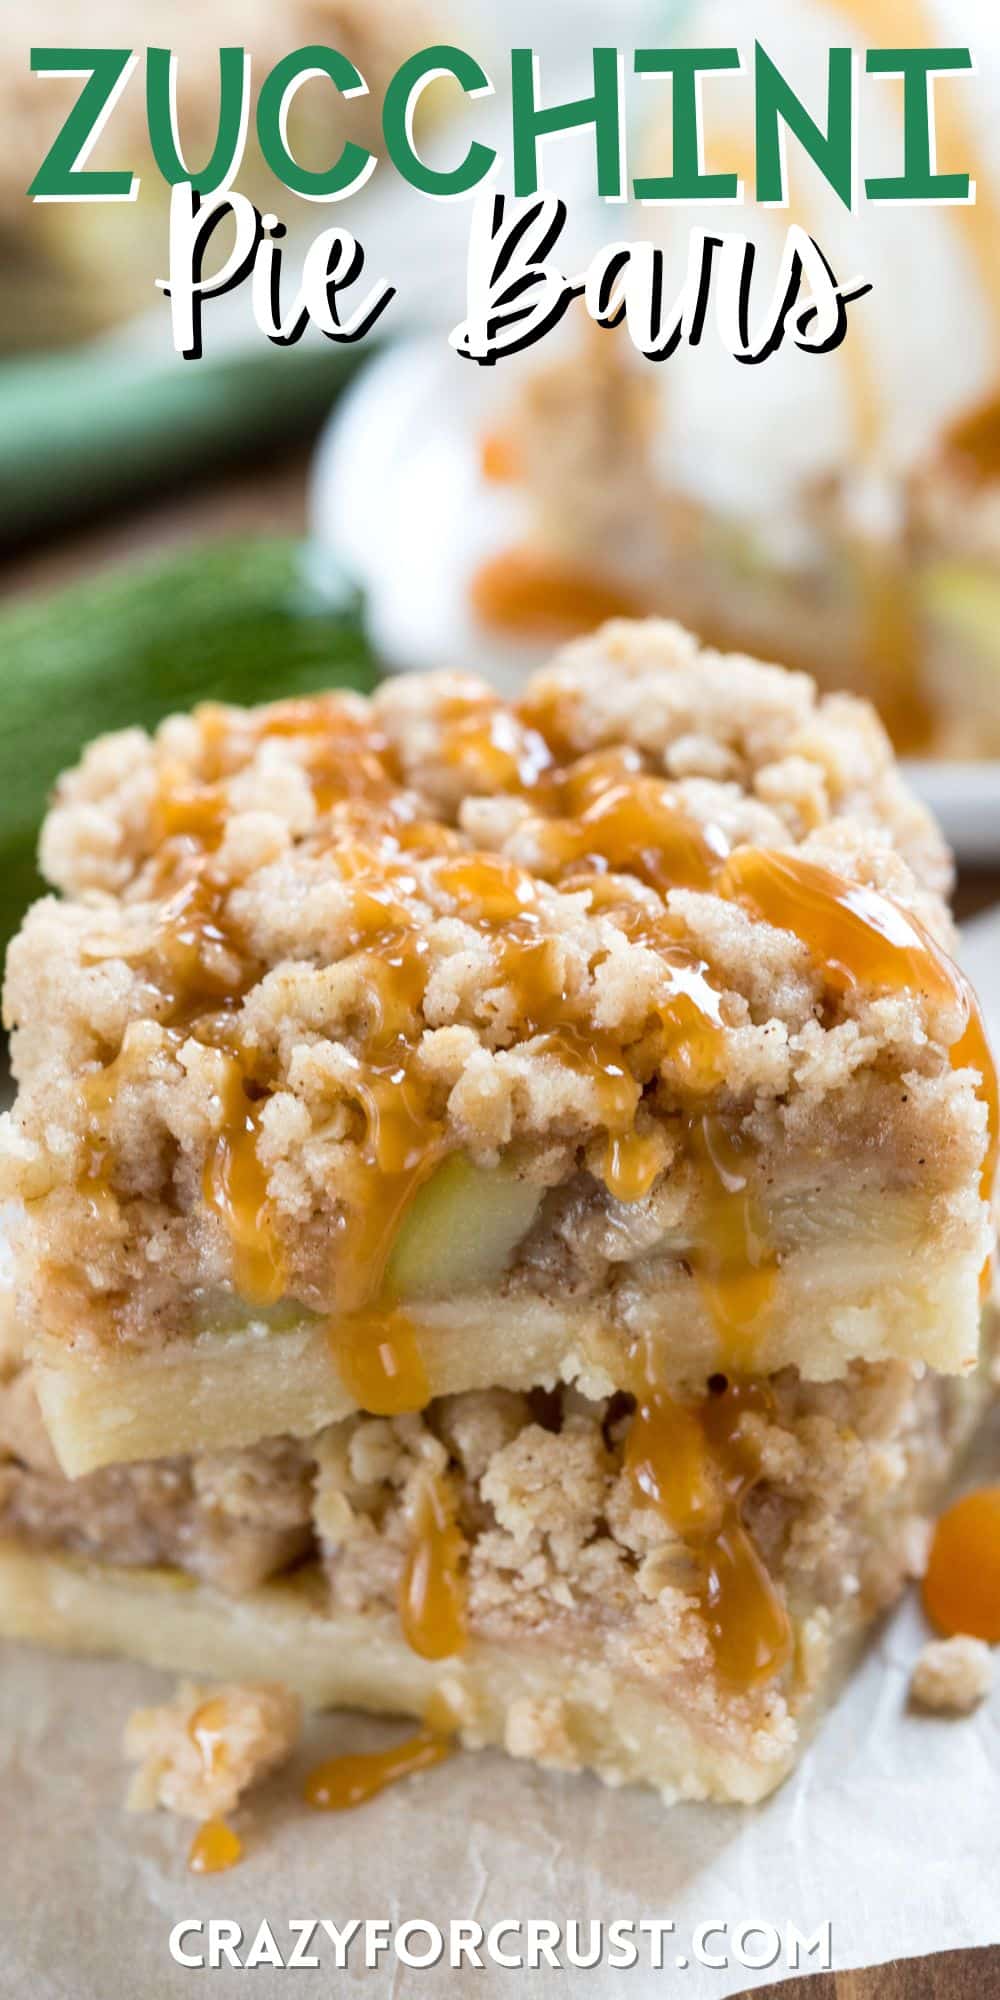 stacked zucchini bars with zucchini baked in and a crumble topping with words on the image.